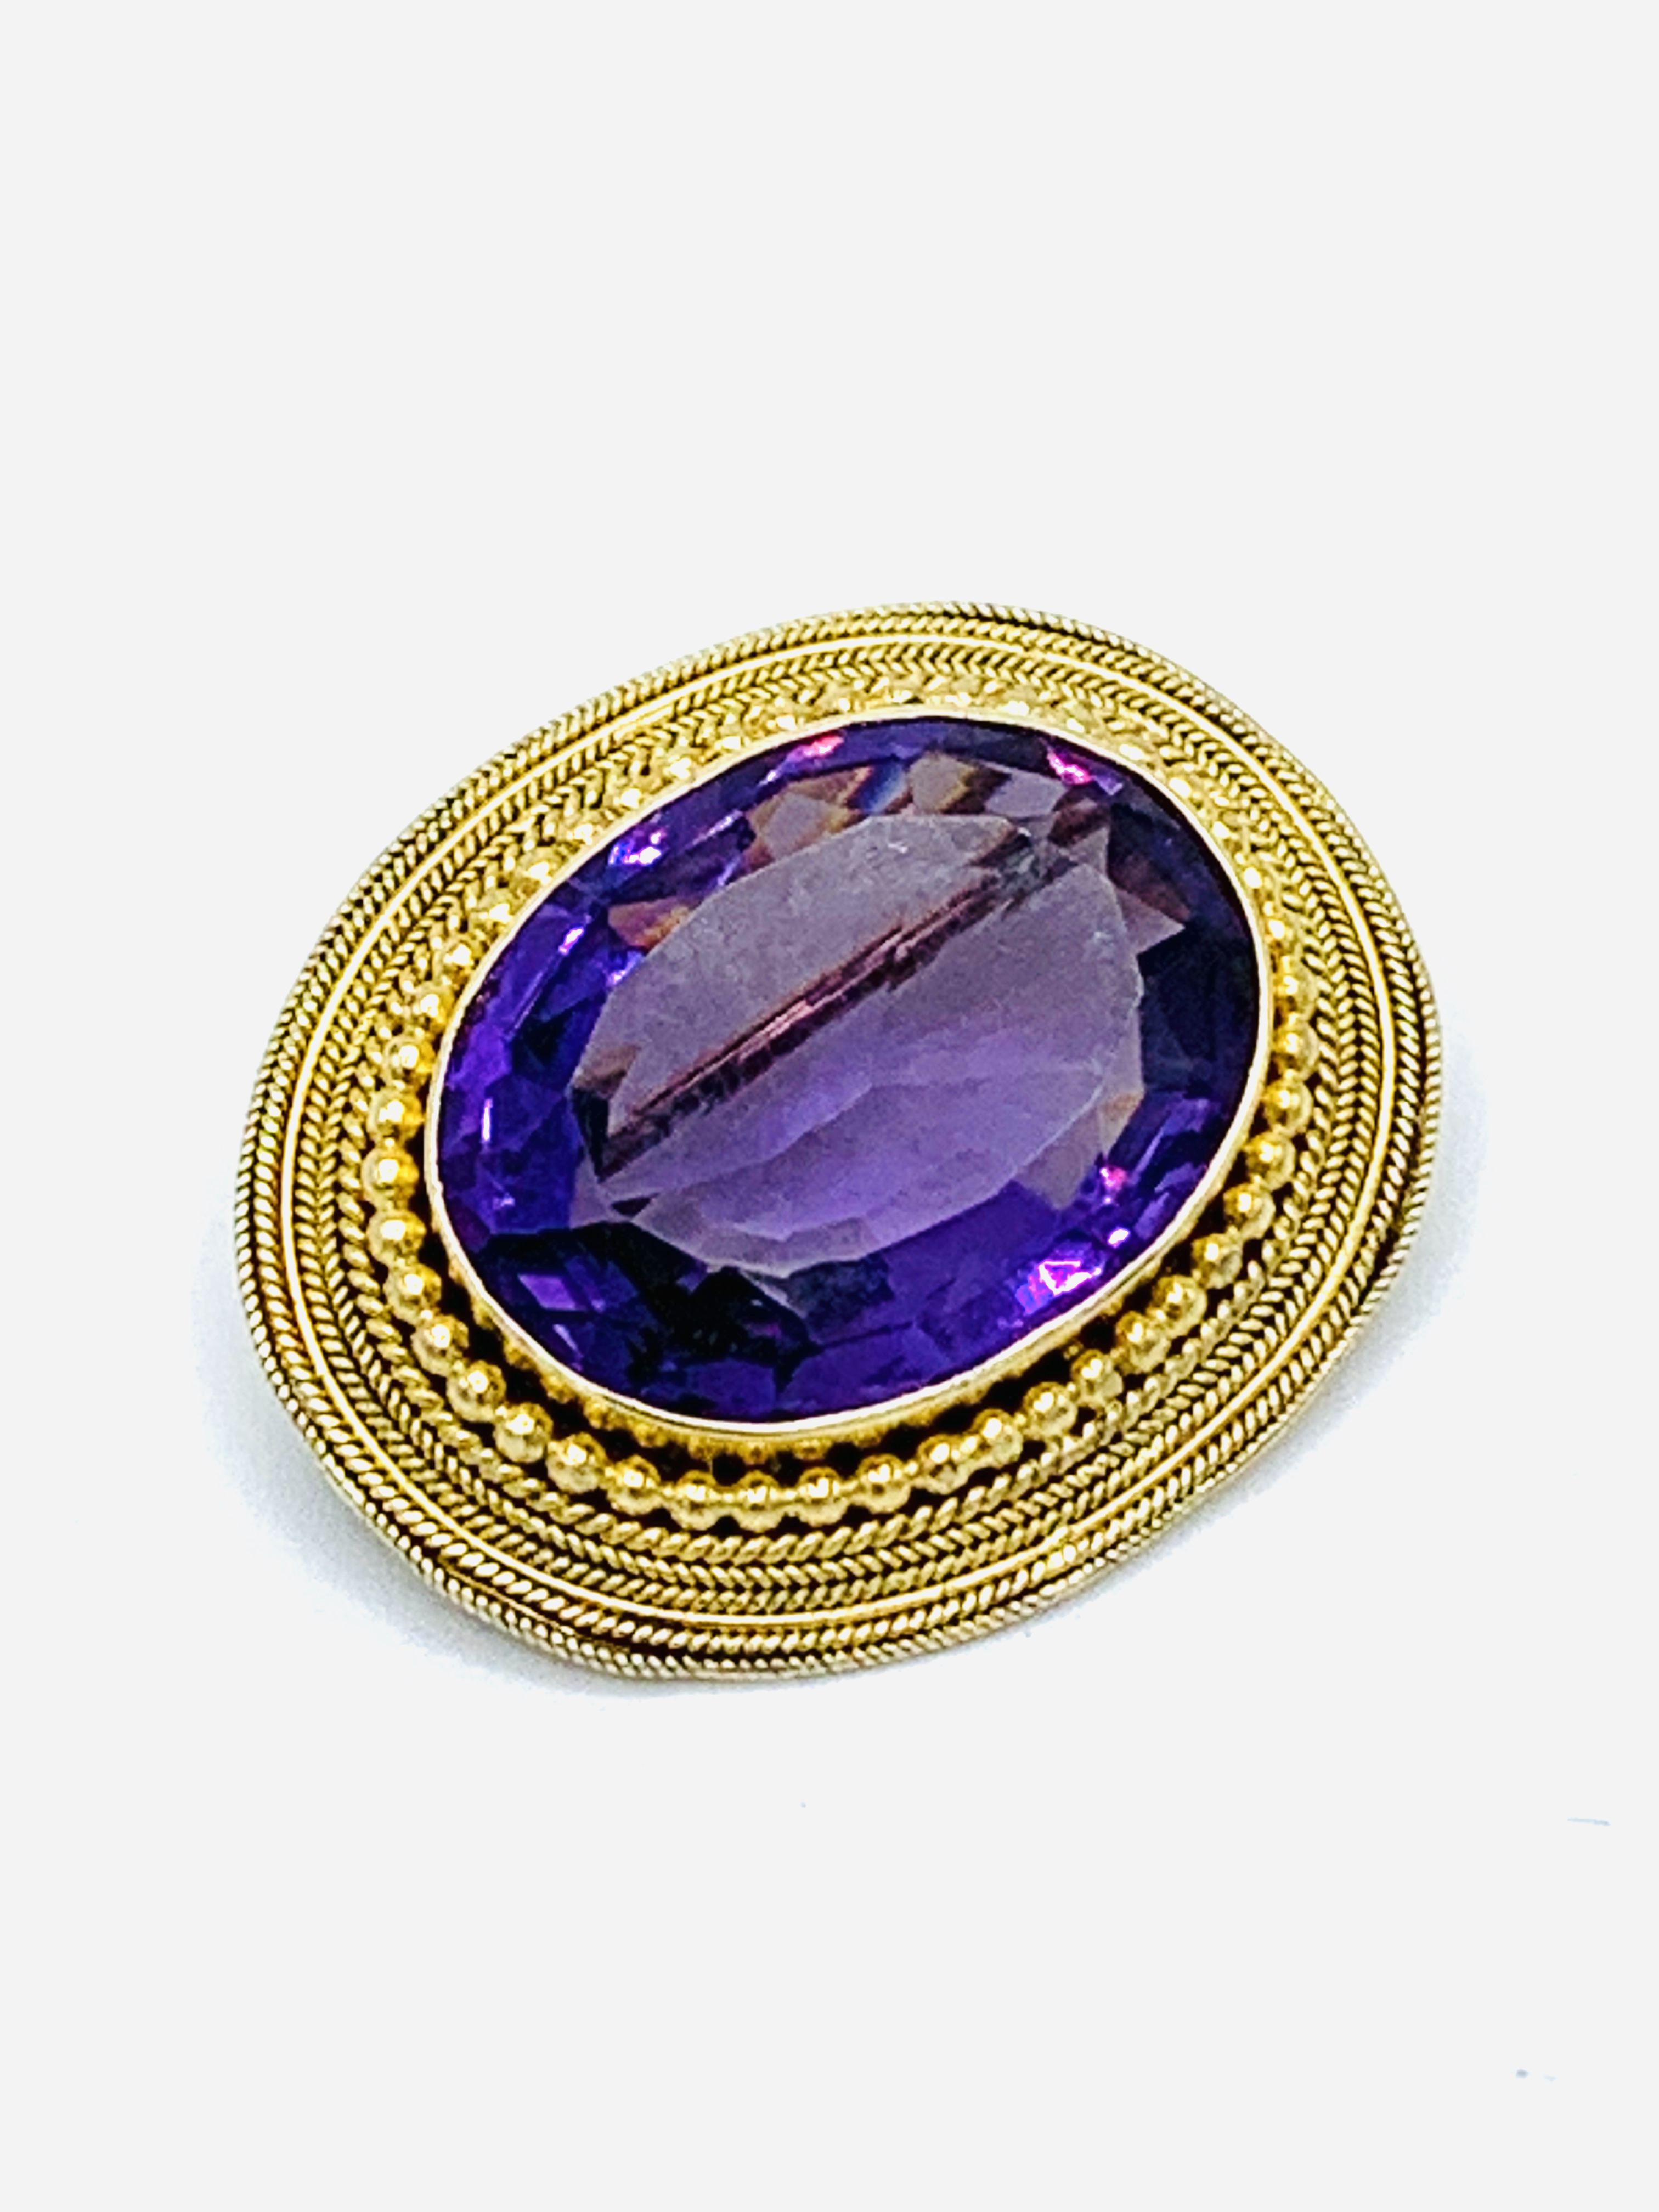 Late 19th century 14ct gold mounted amethyst brooch.